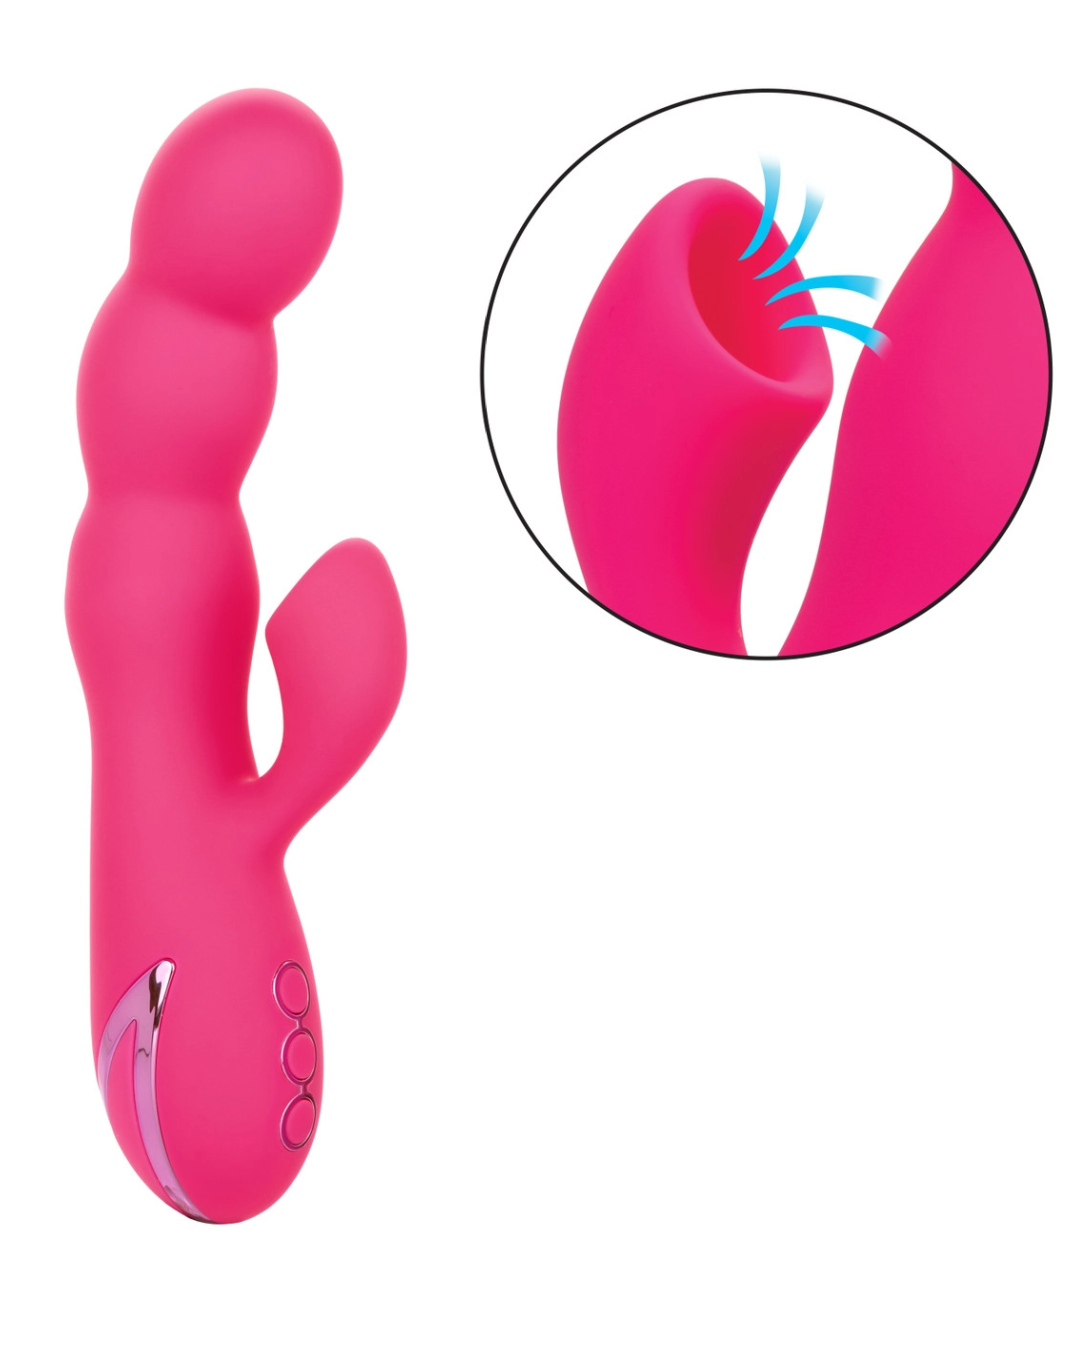 California Dreaming Oceanside Orgasm Dual Stimulation Vibrator next to close up picture showing air pulsation 